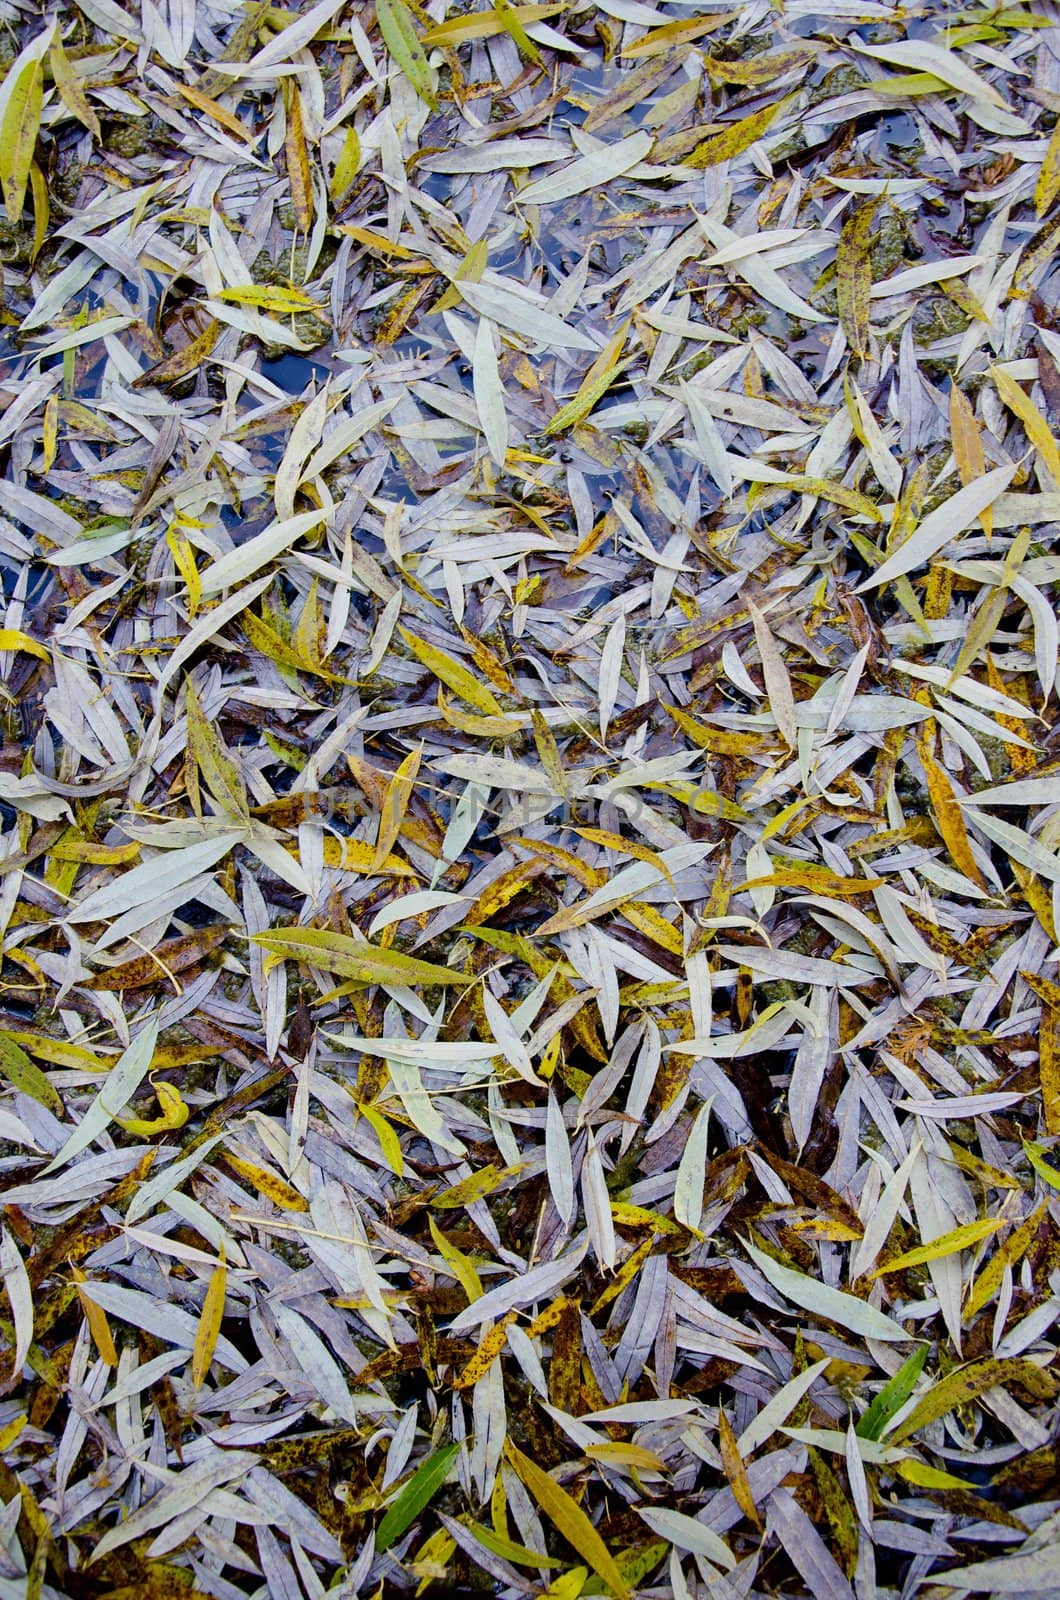 Willow leaves fallen on ground in autumn. Elongated narrow leaf background.